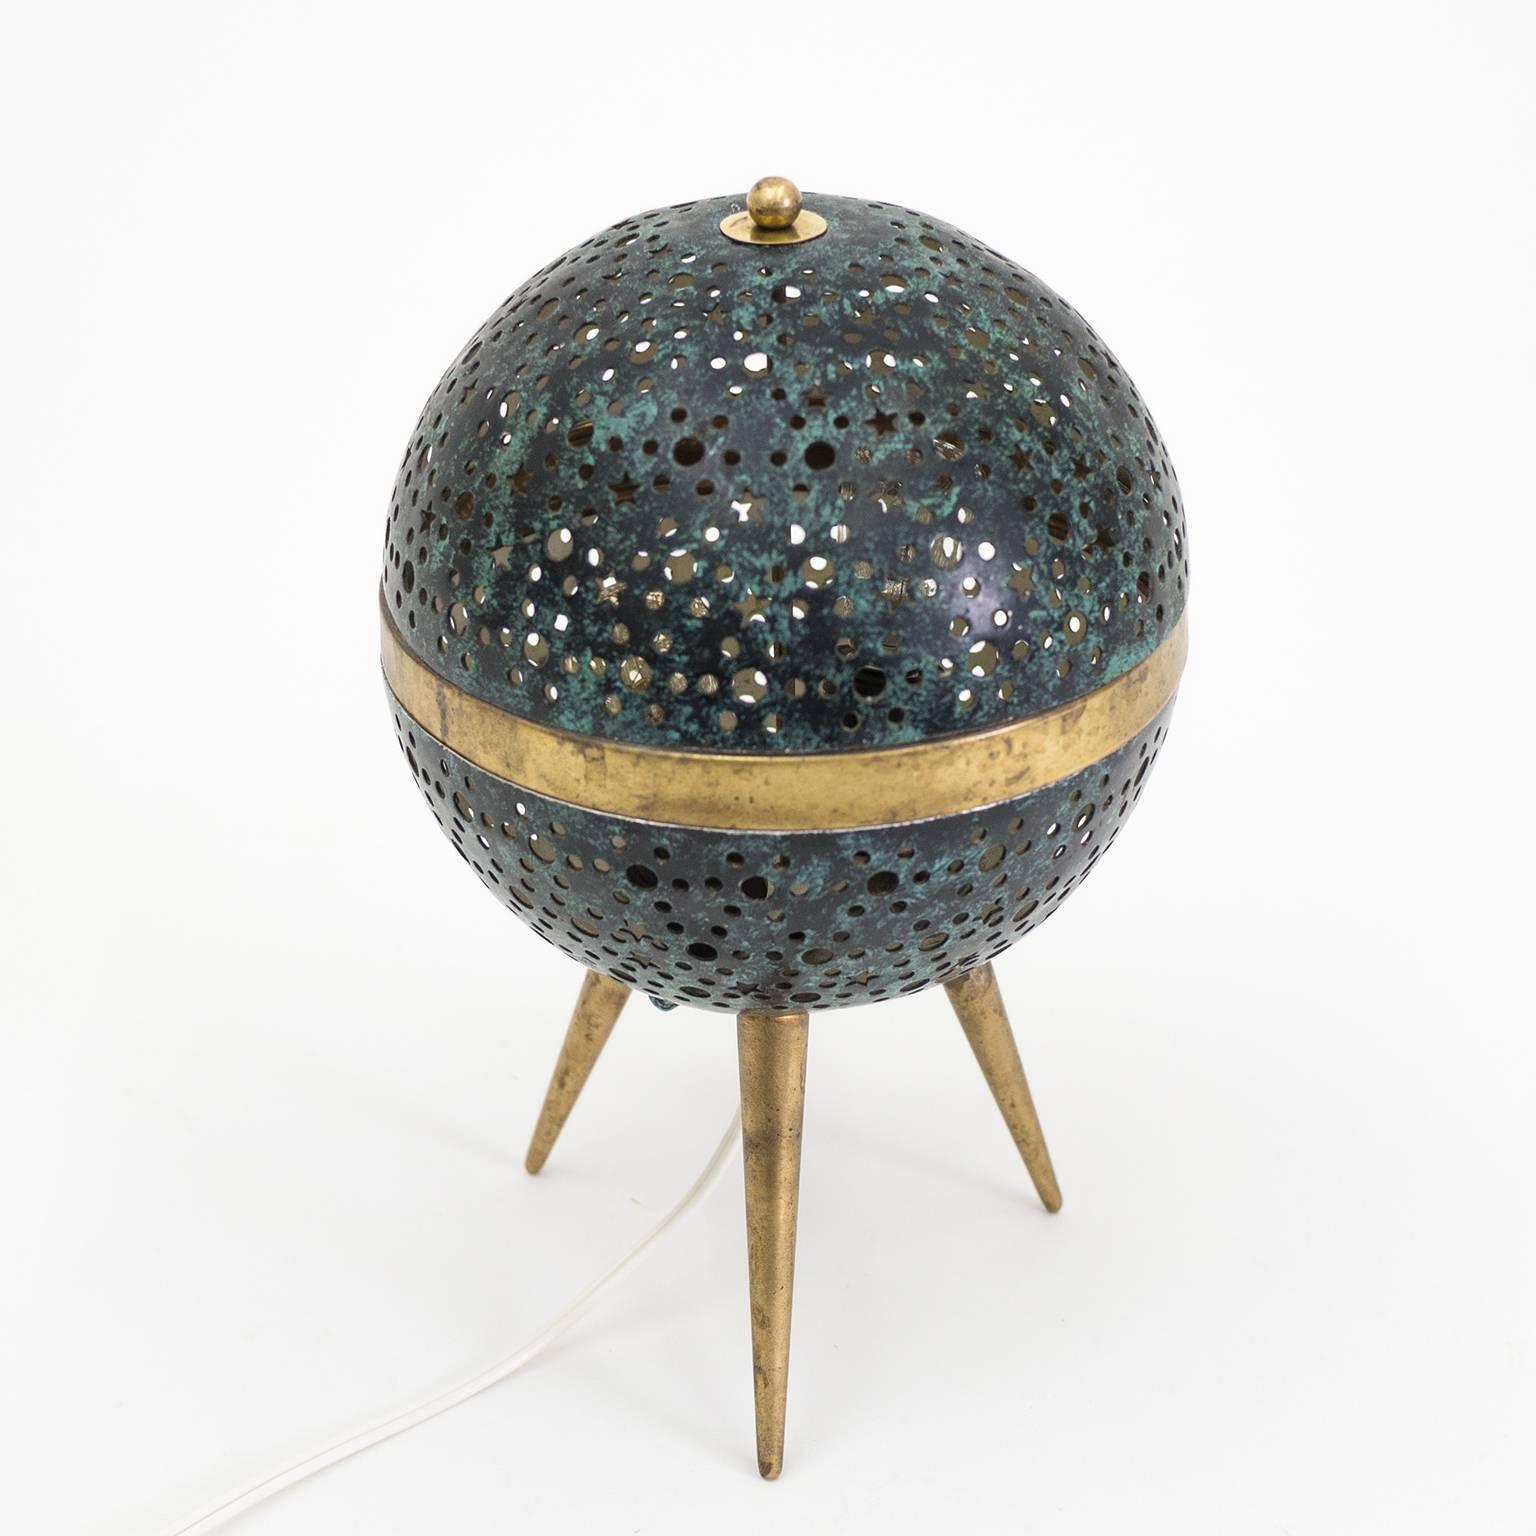 Delightful little mood table lamp from France, circa 1950. The pierced aluminum globe is covered in tiny circle and star shaped cut-outs and lacquered to resemble patinated bronze. Despite its diminutive size this lamp is an instant eyecatcher due